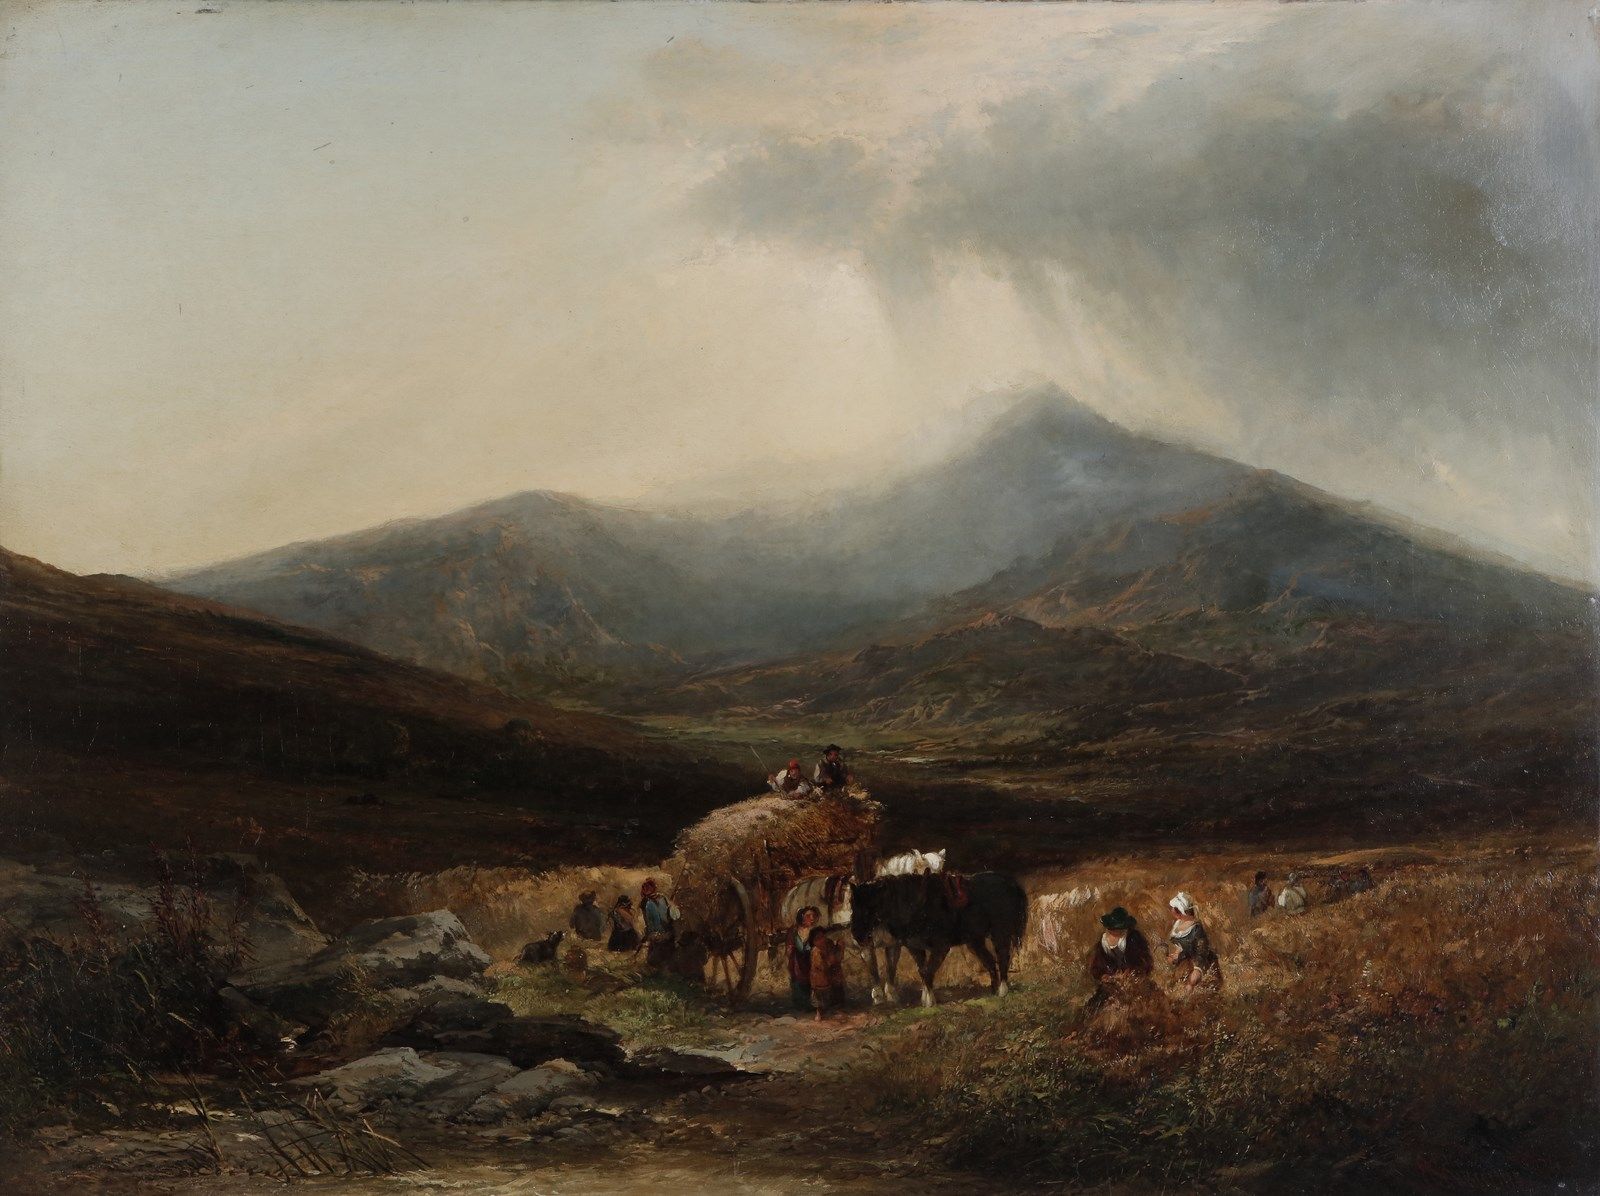 EDWARD CHARLES WILLIAMS Landscape with peasants and animals. Paisaje con campesi&hellip;